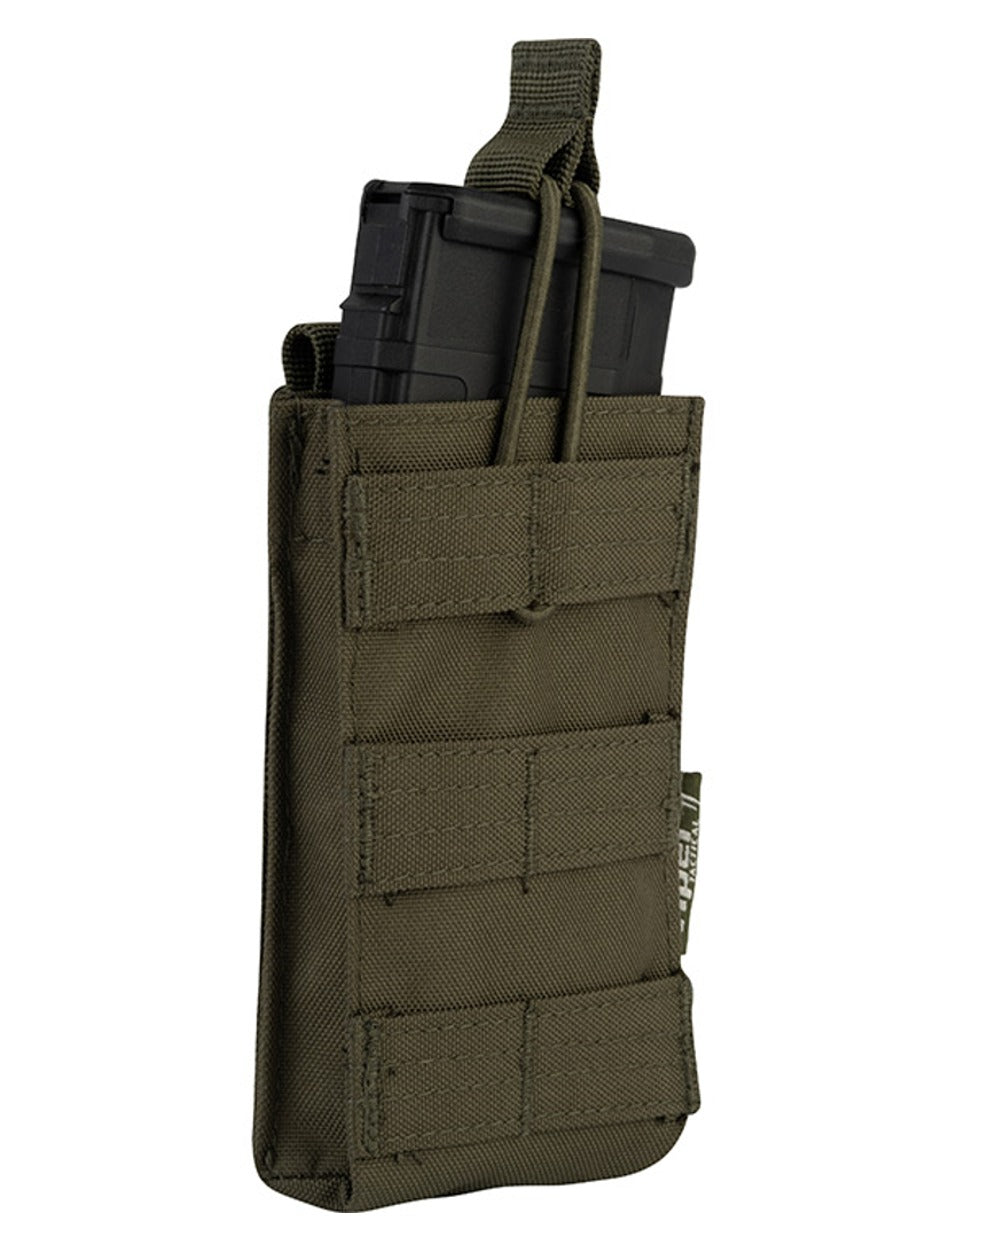 Viper Quick Release Mag Pouch in Green 